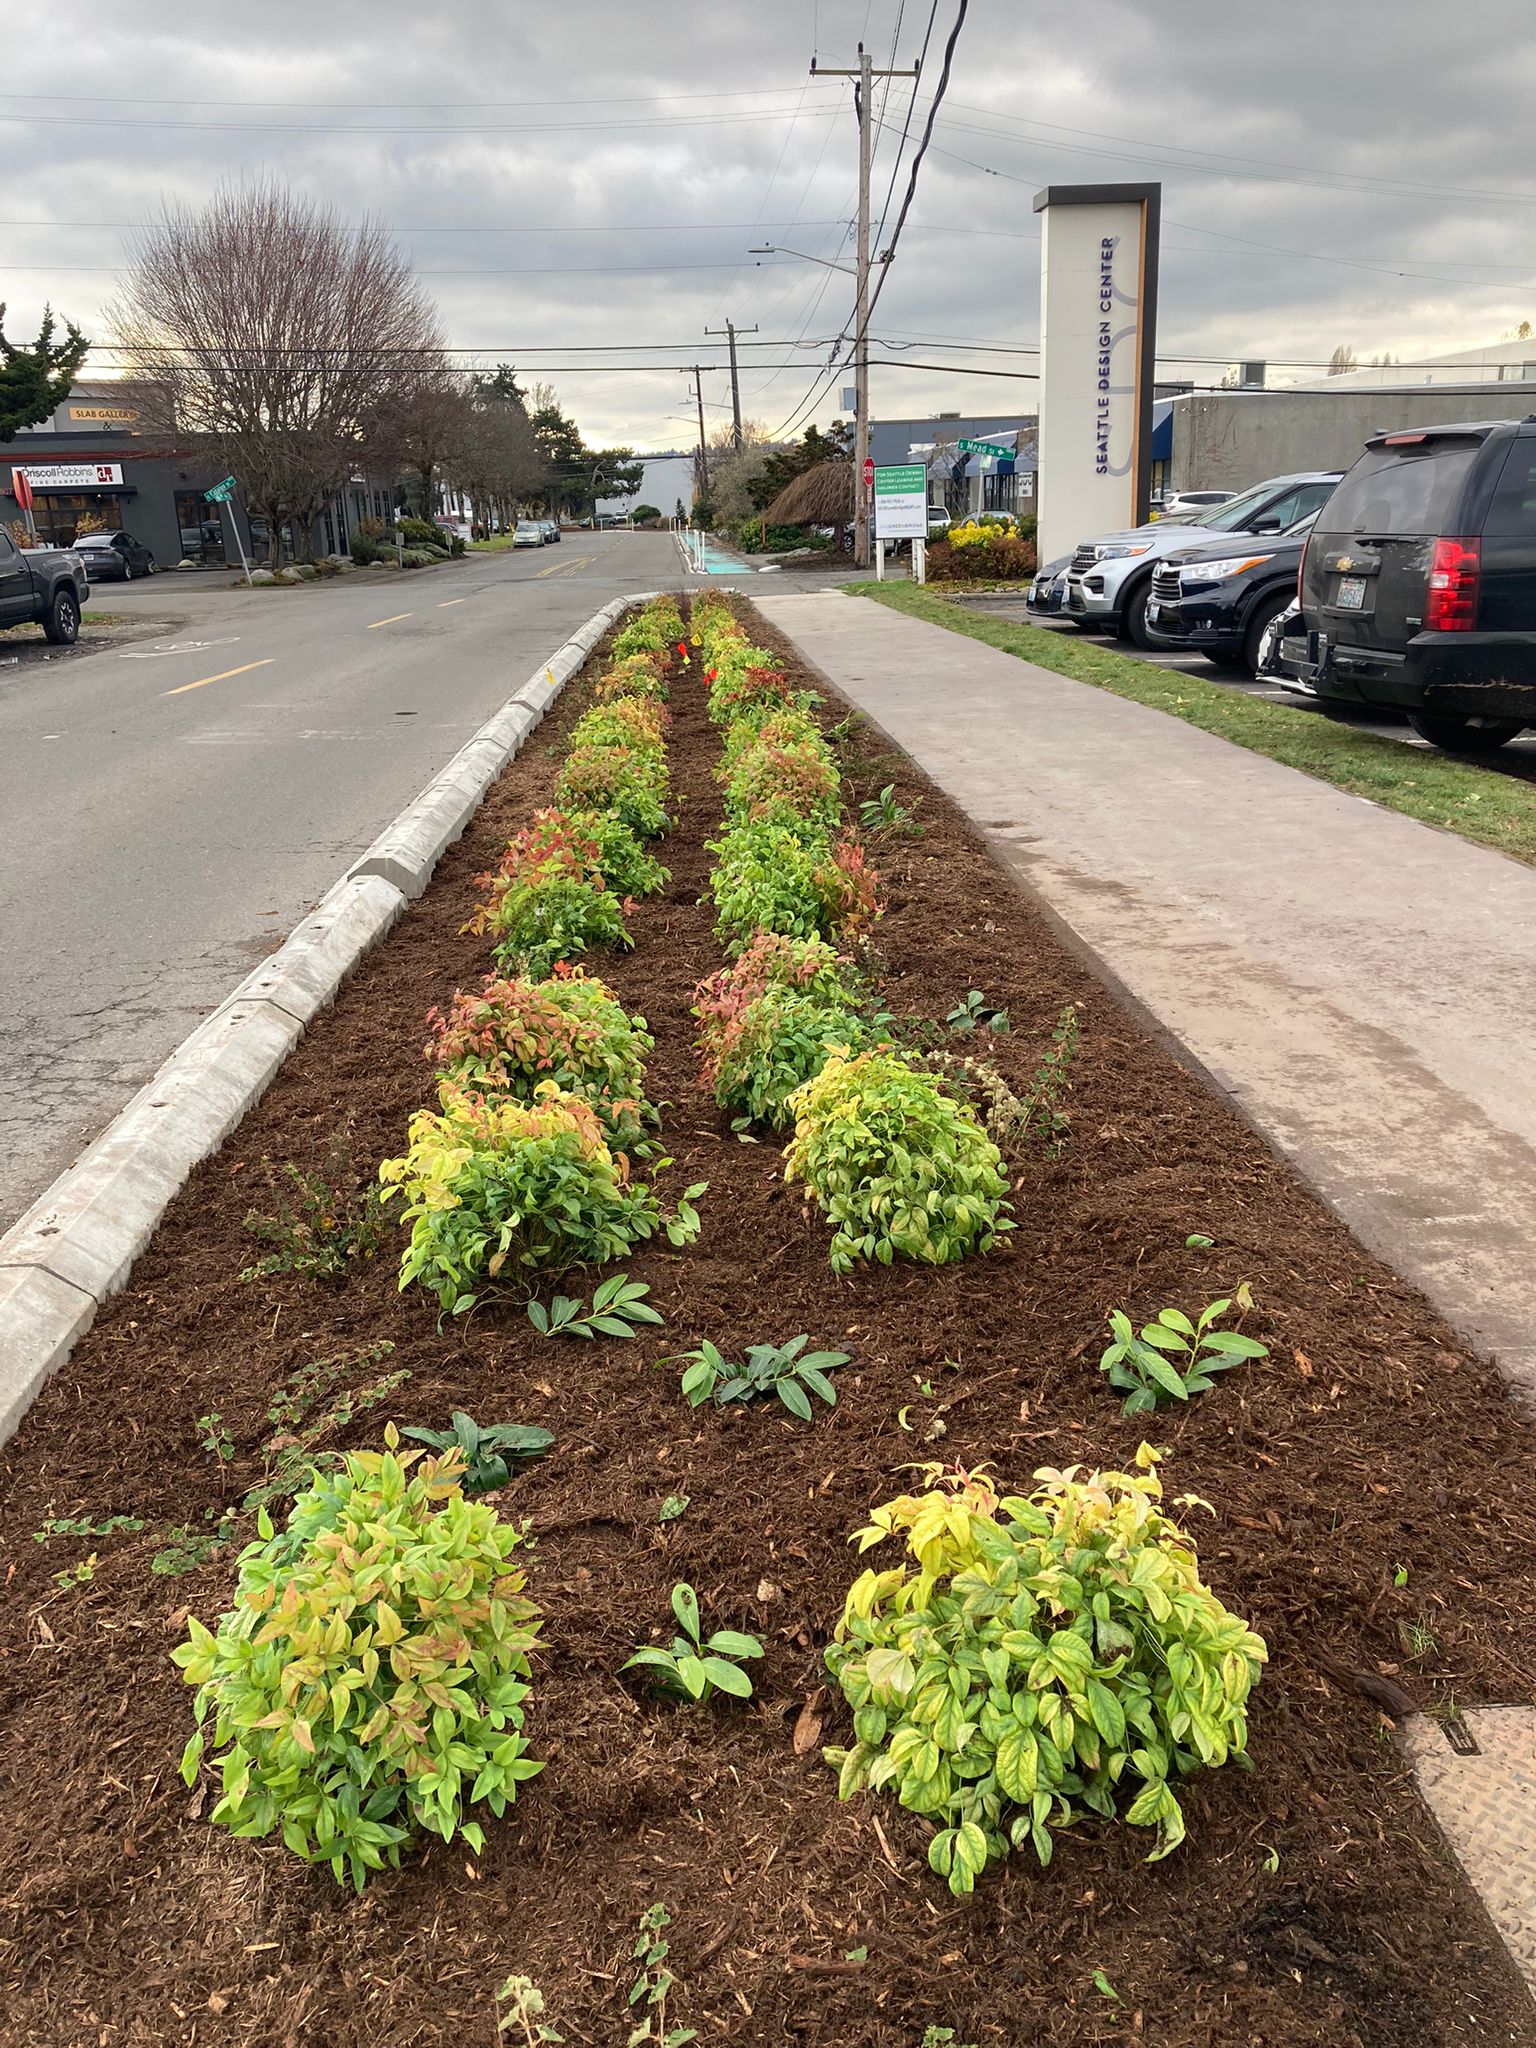 Natural drainage with native plants installed in a neighborhood. The street, sidewalk, parked cars, and a tree are in the background, on a cloudy day.